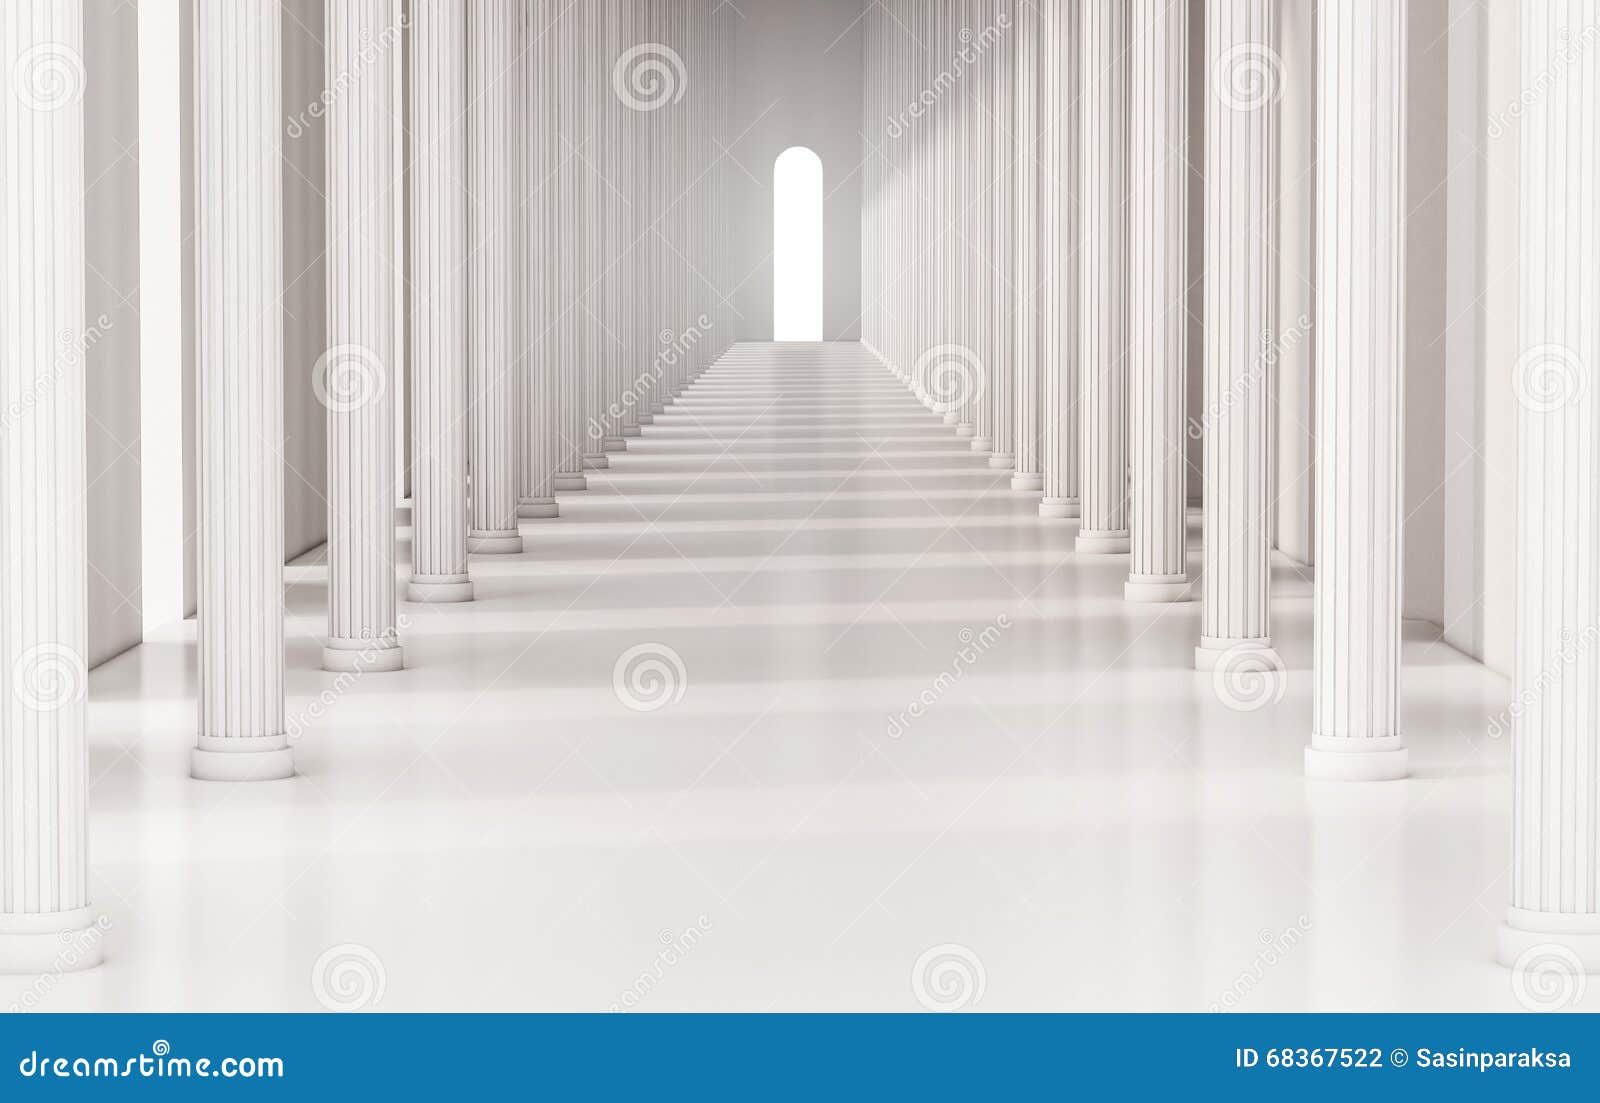 corridor with roman pillars and bright light at the exit, 3d rendered